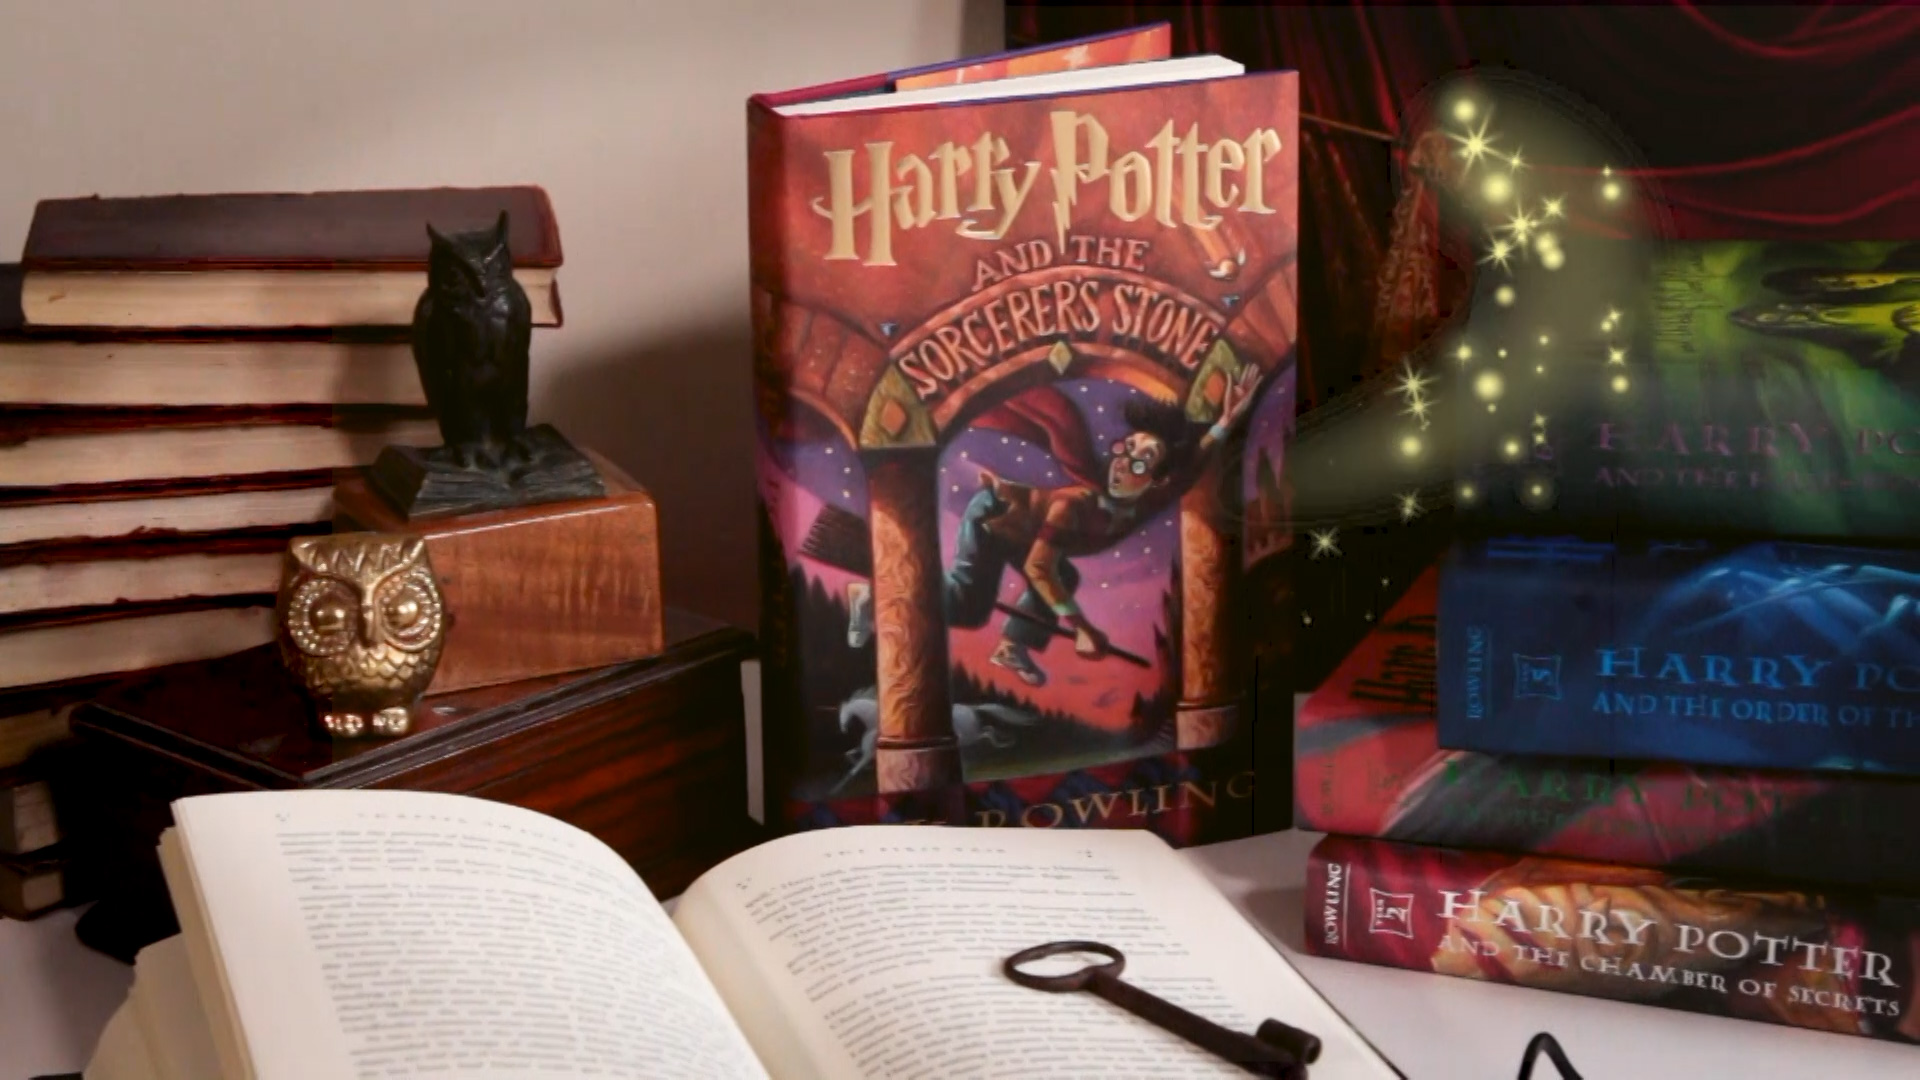 SCHOLASTIC MARKS 25 YEARS OF HARRY POTTER READING MAGIC IN THE